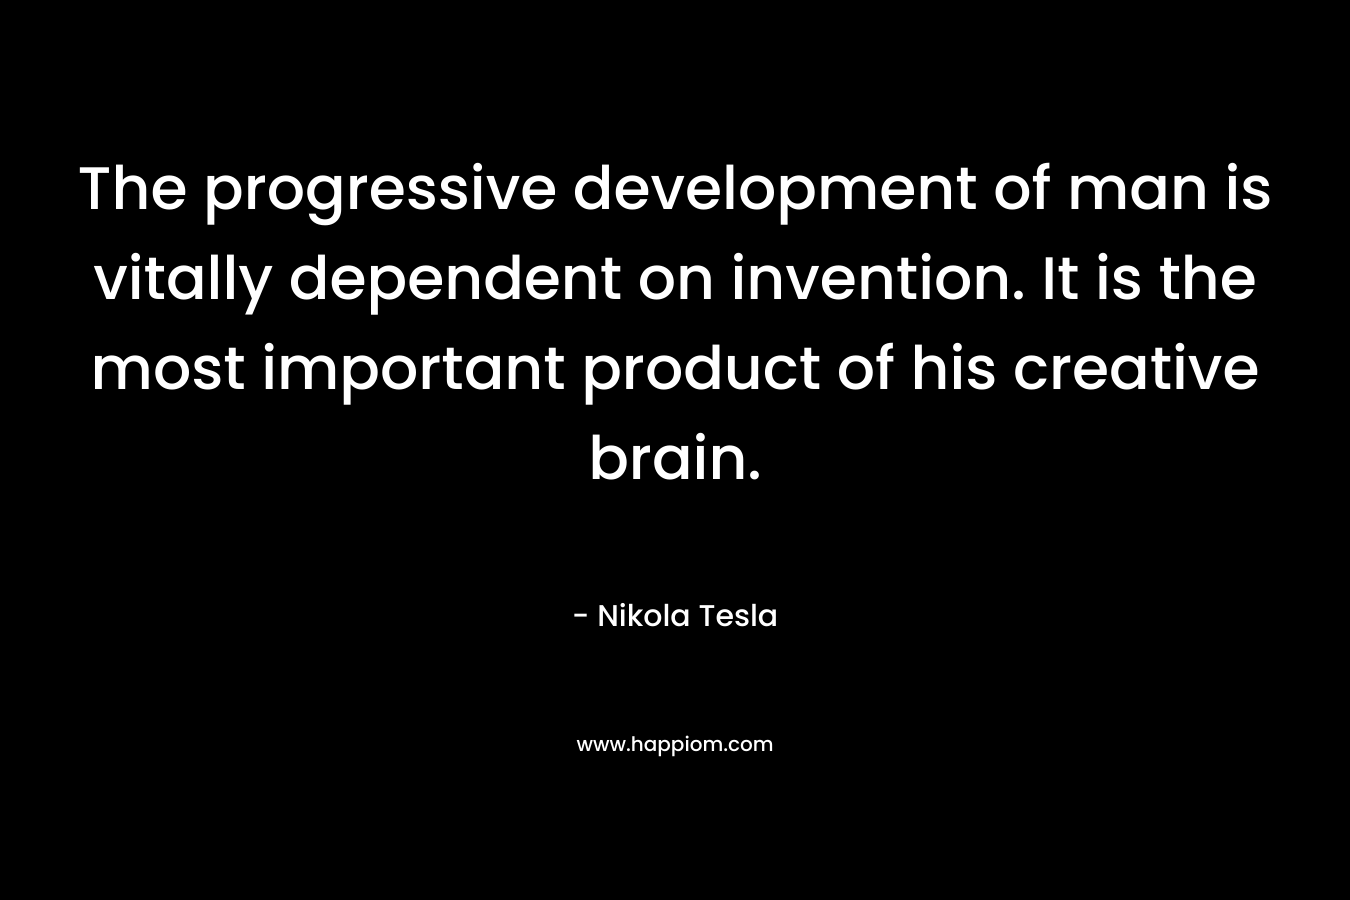 The progressive development of man is vitally dependent on invention. It is the most important product of his creative brain.